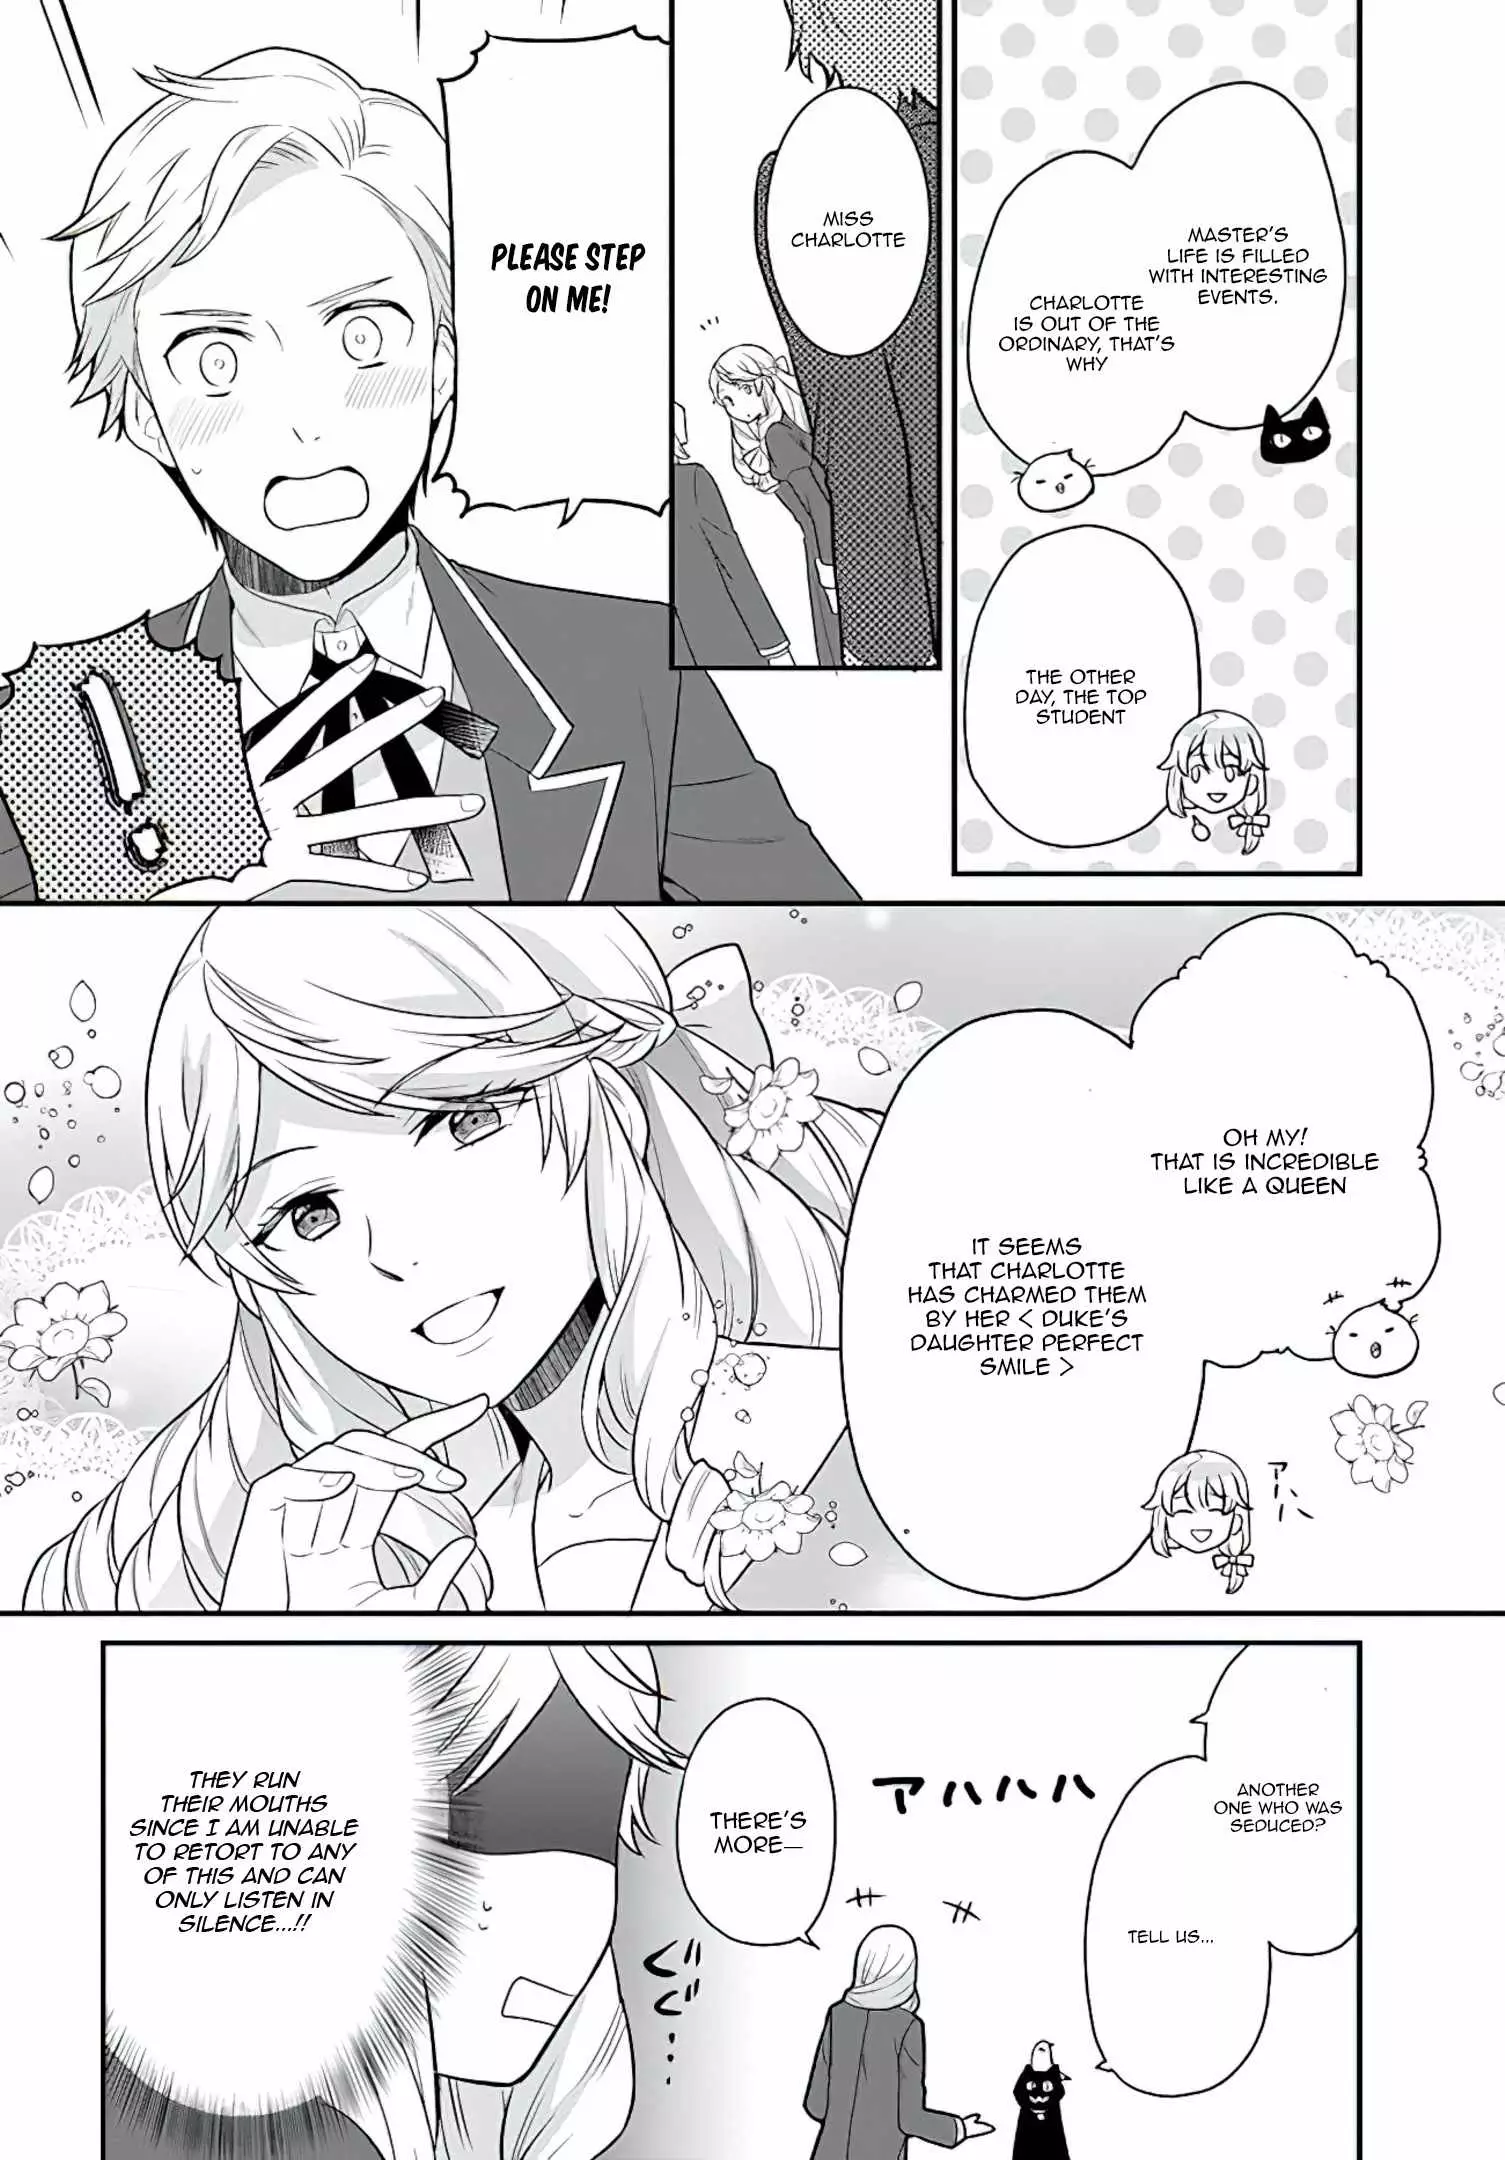 Because Of Her Love For Sake, The Otome Game Setting Was Broken And The Villainous Noblewoman Became The Noblewoman With Cheats - 26 page 5-710a40a1